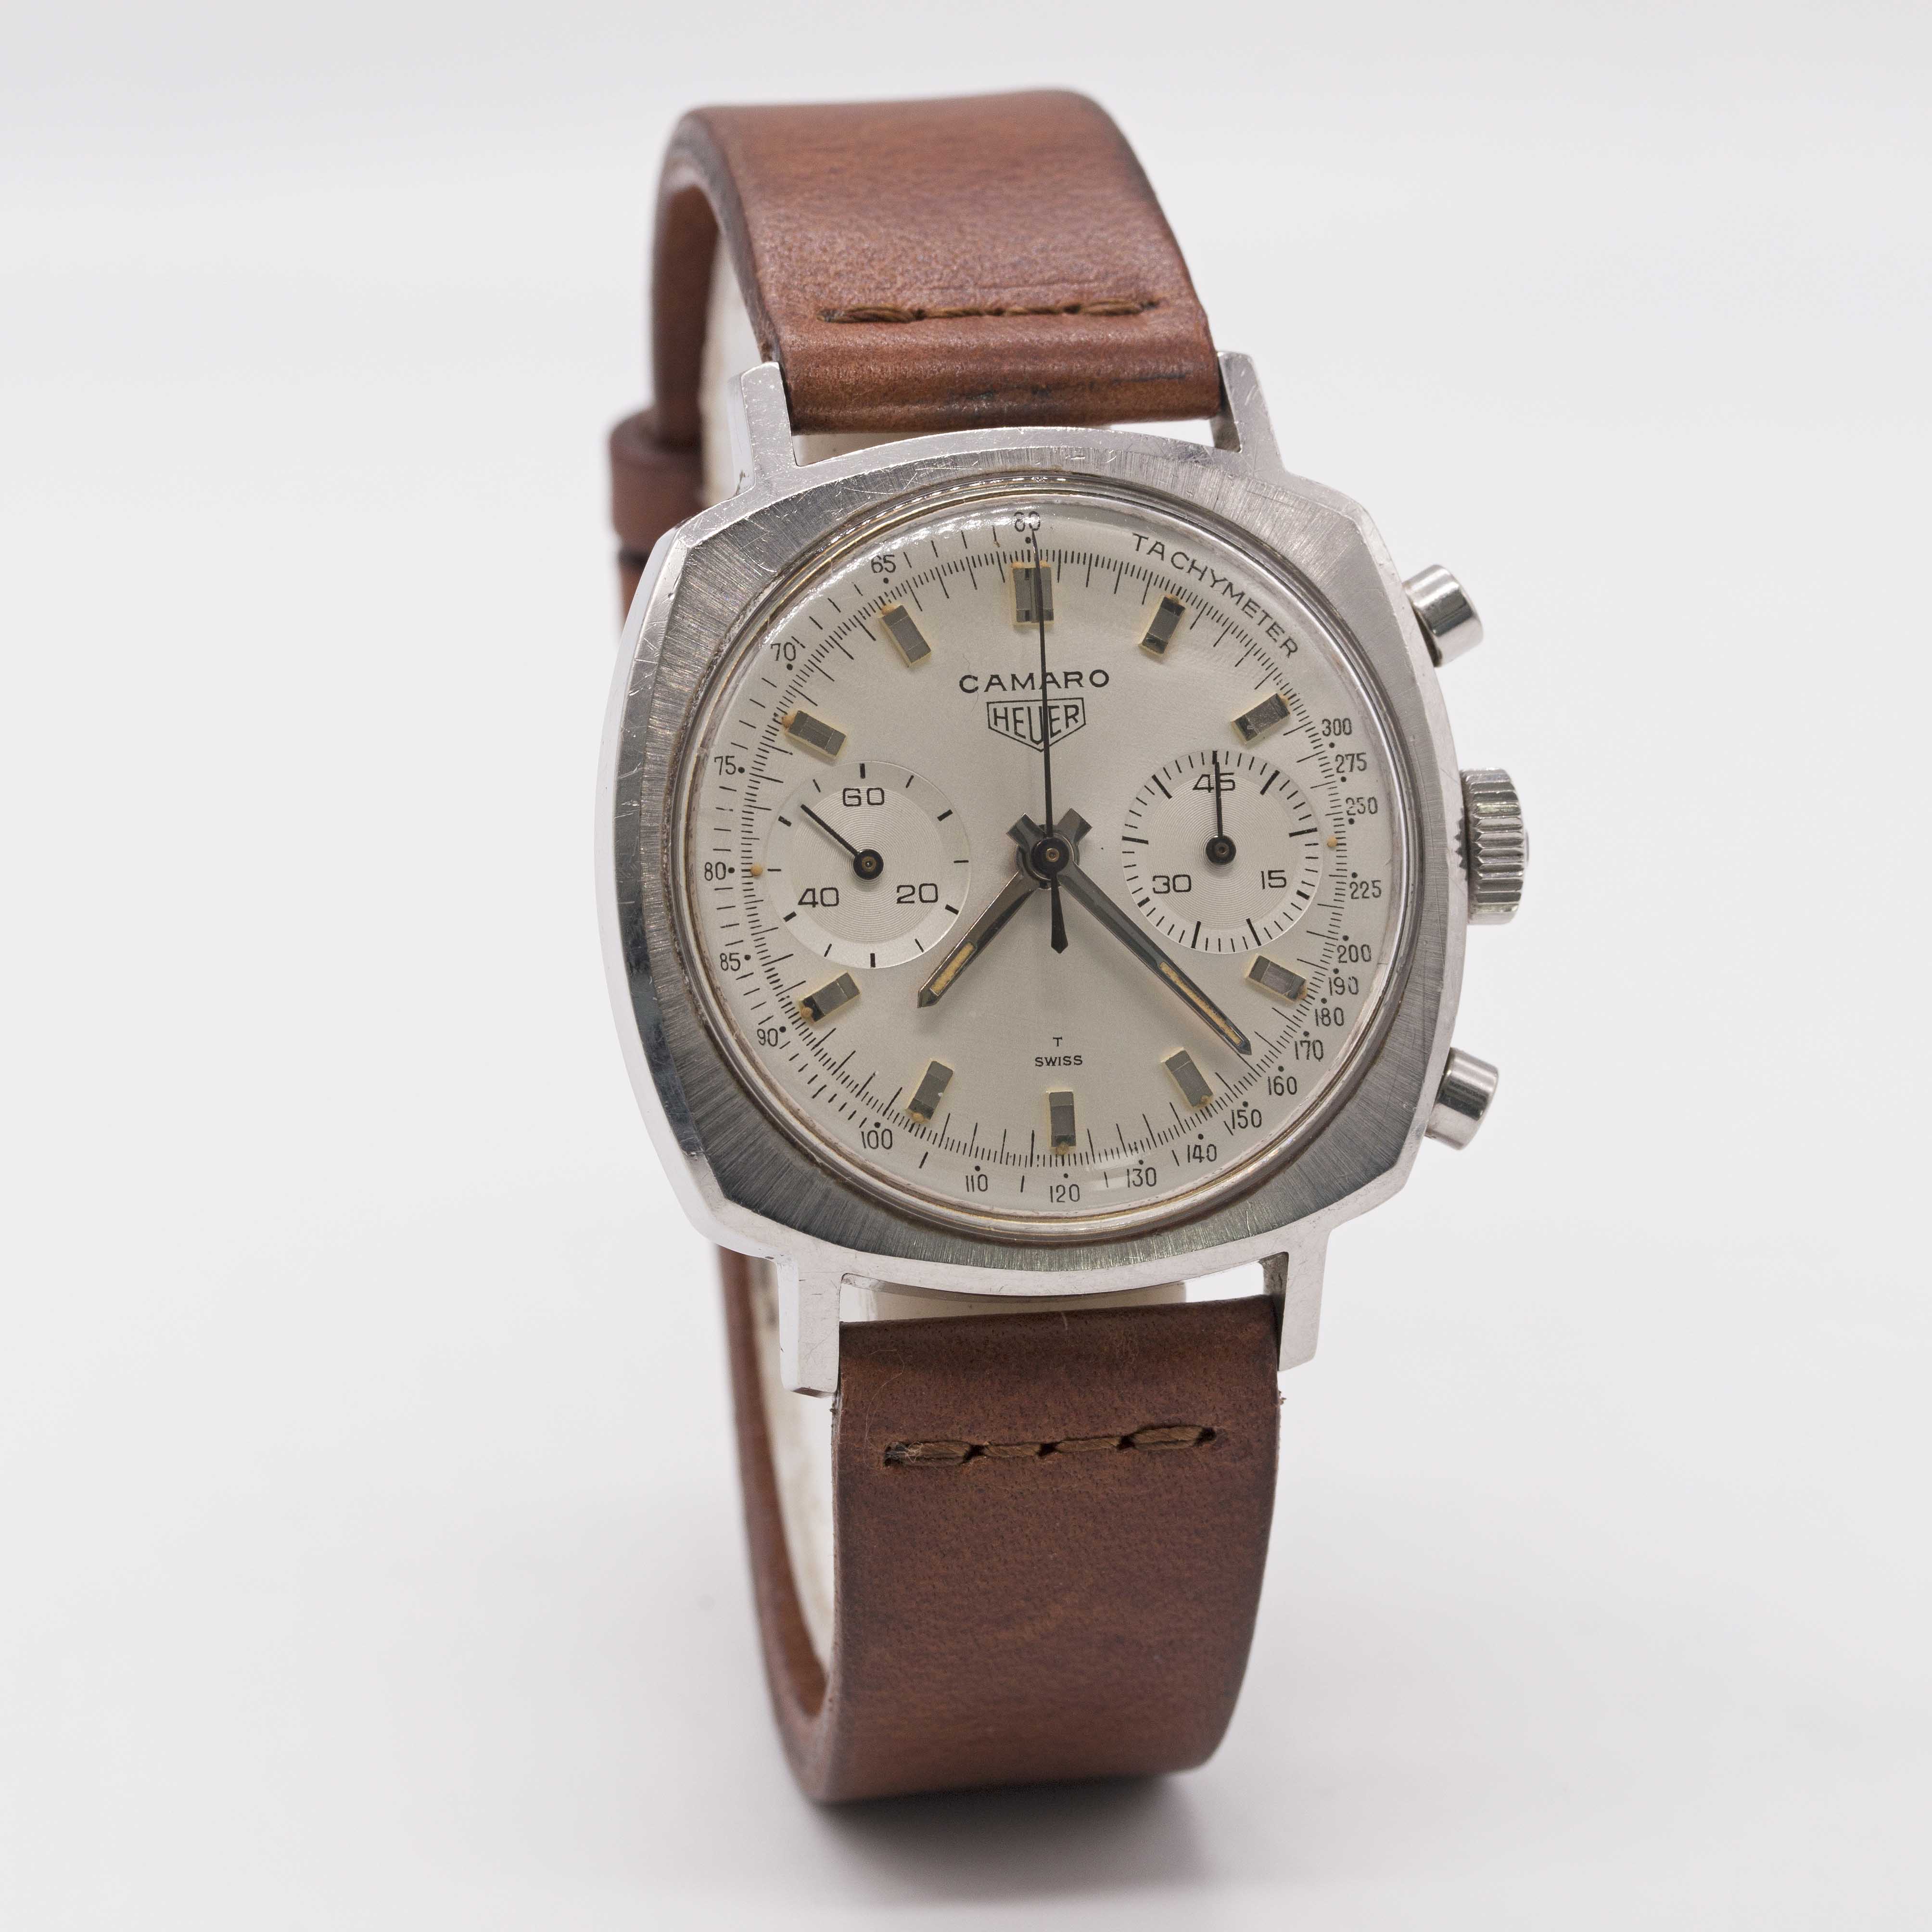 A GENTLEMAN'S STAINLESS STEEL HEUER CAMARO CHRONOGRAPH WRIST WATCH CIRCA 1970, REF. 9220T WITH - Image 5 of 9